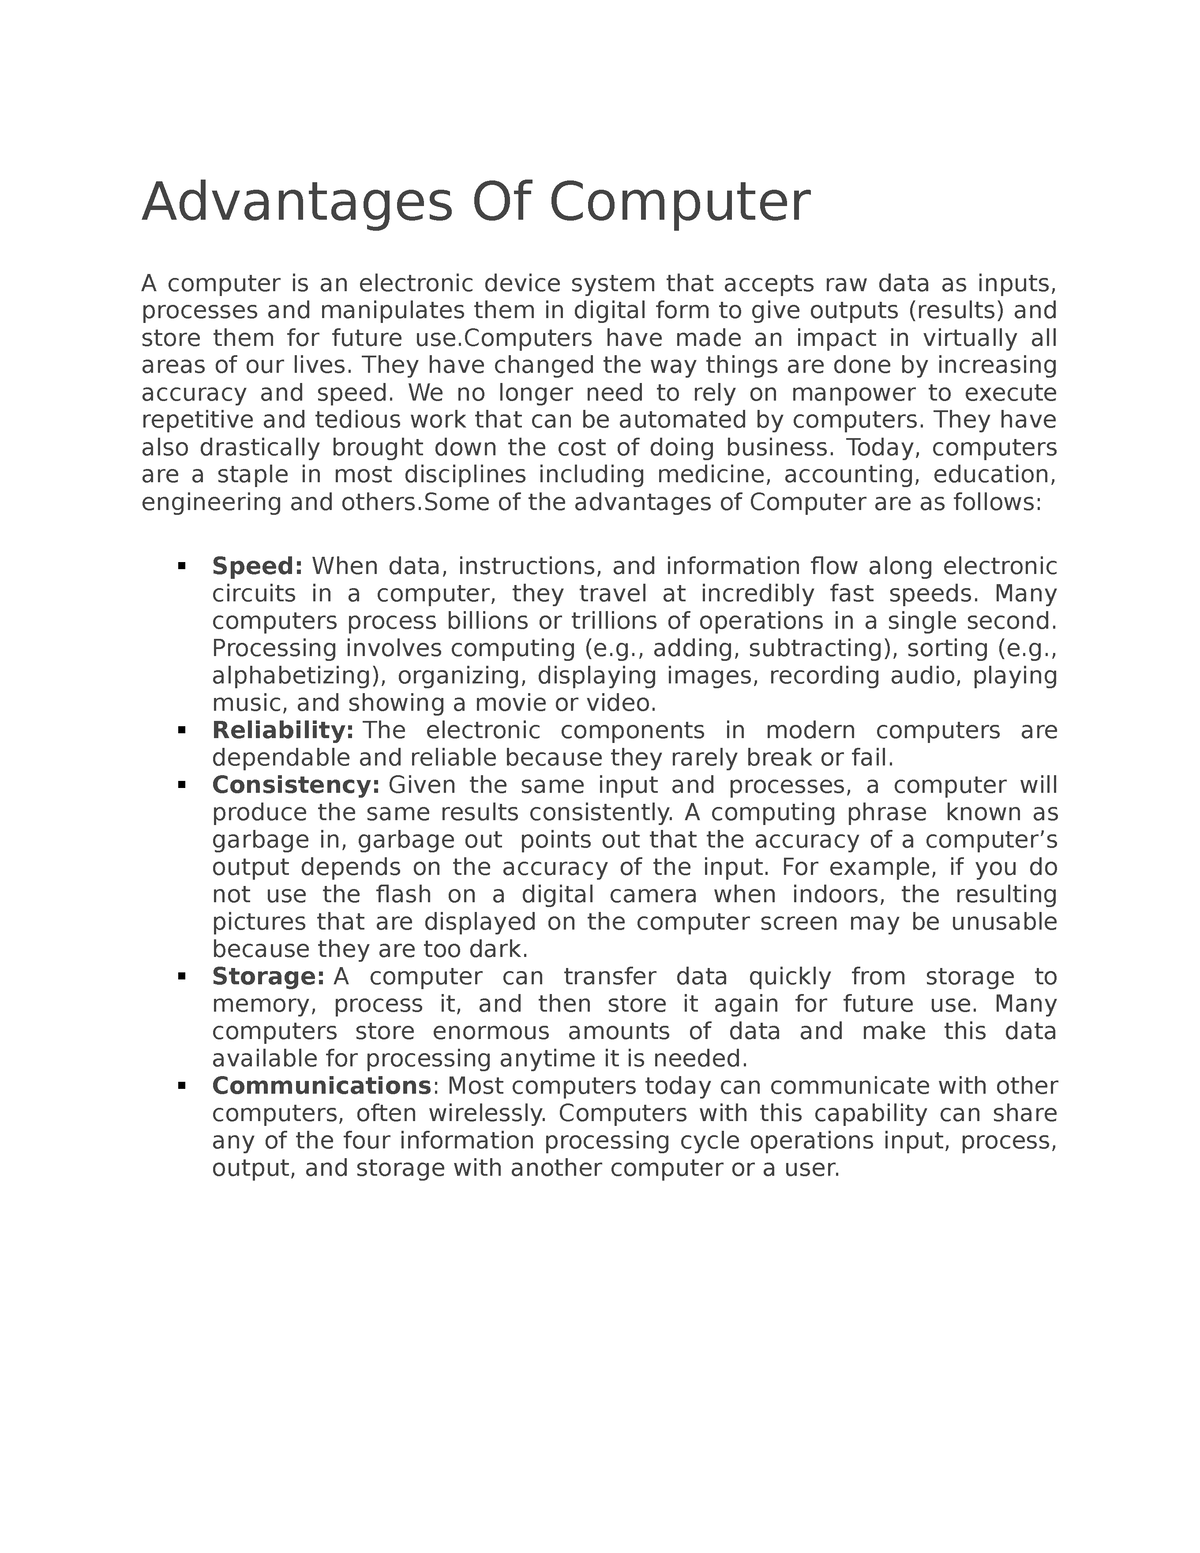 merits and demerits of computer in points